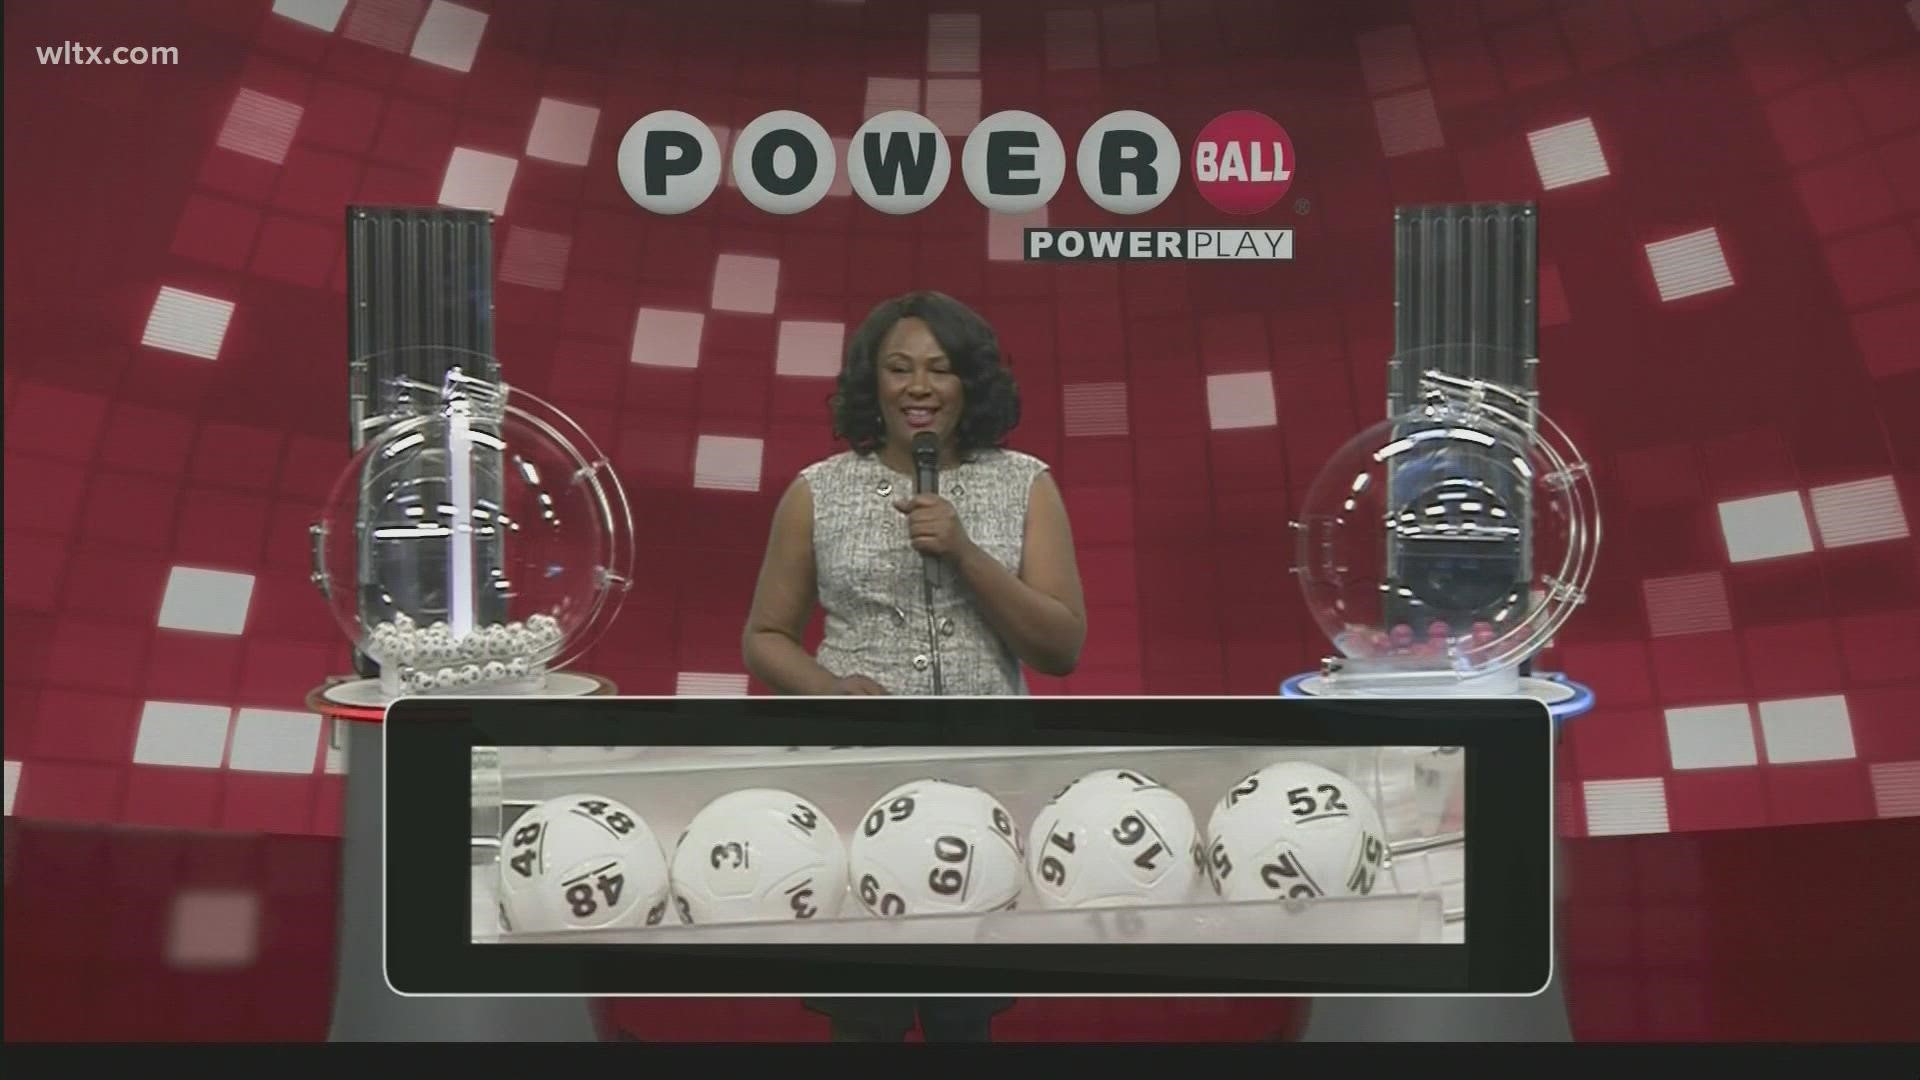 Here are the winning Powerball numbers for November 17,2021